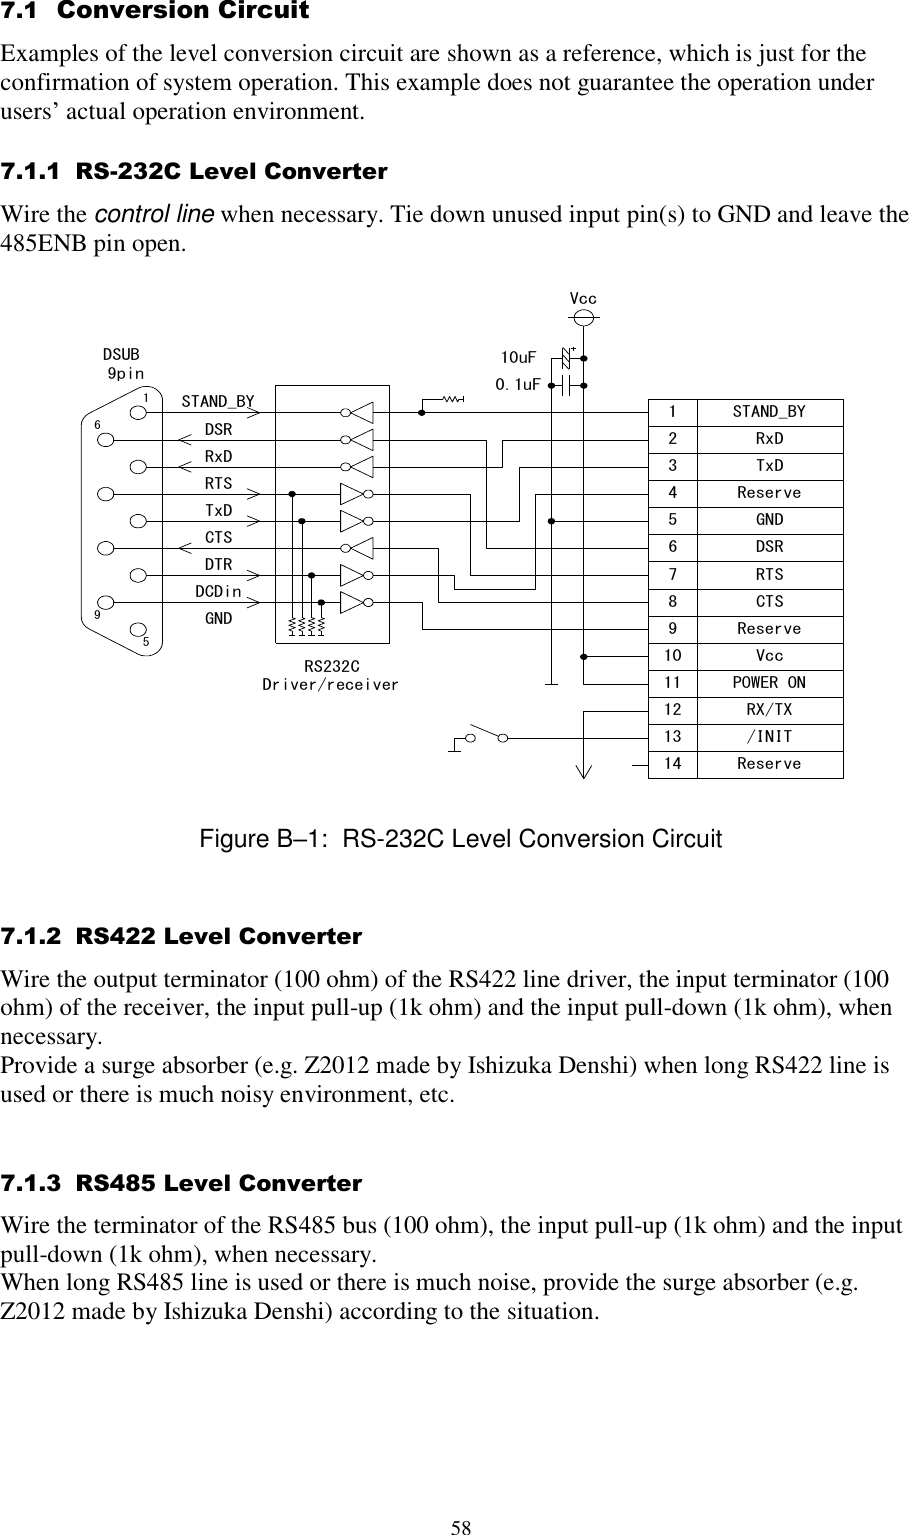  58 7.1  Conversion Circuit Examples of the level conversion circuit are shown as a reference, which is just for the confirmation of system operation. This example does not guarantee the operation under users’ actual operation environment. 7.1.1  RS-232C Level Converter Wire the control line when necessary. Tie down unused input pin(s) to GND and leave the 485ENB pin open.  1596STAND_BYDSRRxDRTSTxDCTSDTRDCDinGNDDSUB 9pinRS232CDriver/receiver1234567891011121314Vcc10uF0.1uFRxDTxDGNDDSRRTSCTSVccPOWER ONRX/TX/INITReserveSTAND_BYReserveReserve  Figure B–1:  RS-232C Level Conversion Circuit 7.1.2  RS422 Level Converter Wire the output terminator (100 ohm) of the RS422 line driver, the input terminator (100 ohm) of the receiver, the input pull-up (1k ohm) and the input pull-down (1k ohm), when necessary. Provide a surge absorber (e.g. Z2012 made by Ishizuka Denshi) when long RS422 line is used or there is much noisy environment, etc.  7.1.3  RS485 Level Converter Wire the terminator of the RS485 bus (100 ohm), the input pull-up (1k ohm) and the input pull-down (1k ohm), when necessary. When long RS485 line is used or there is much noise, provide the surge absorber (e.g. Z2012 made by Ishizuka Denshi) according to the situation.     